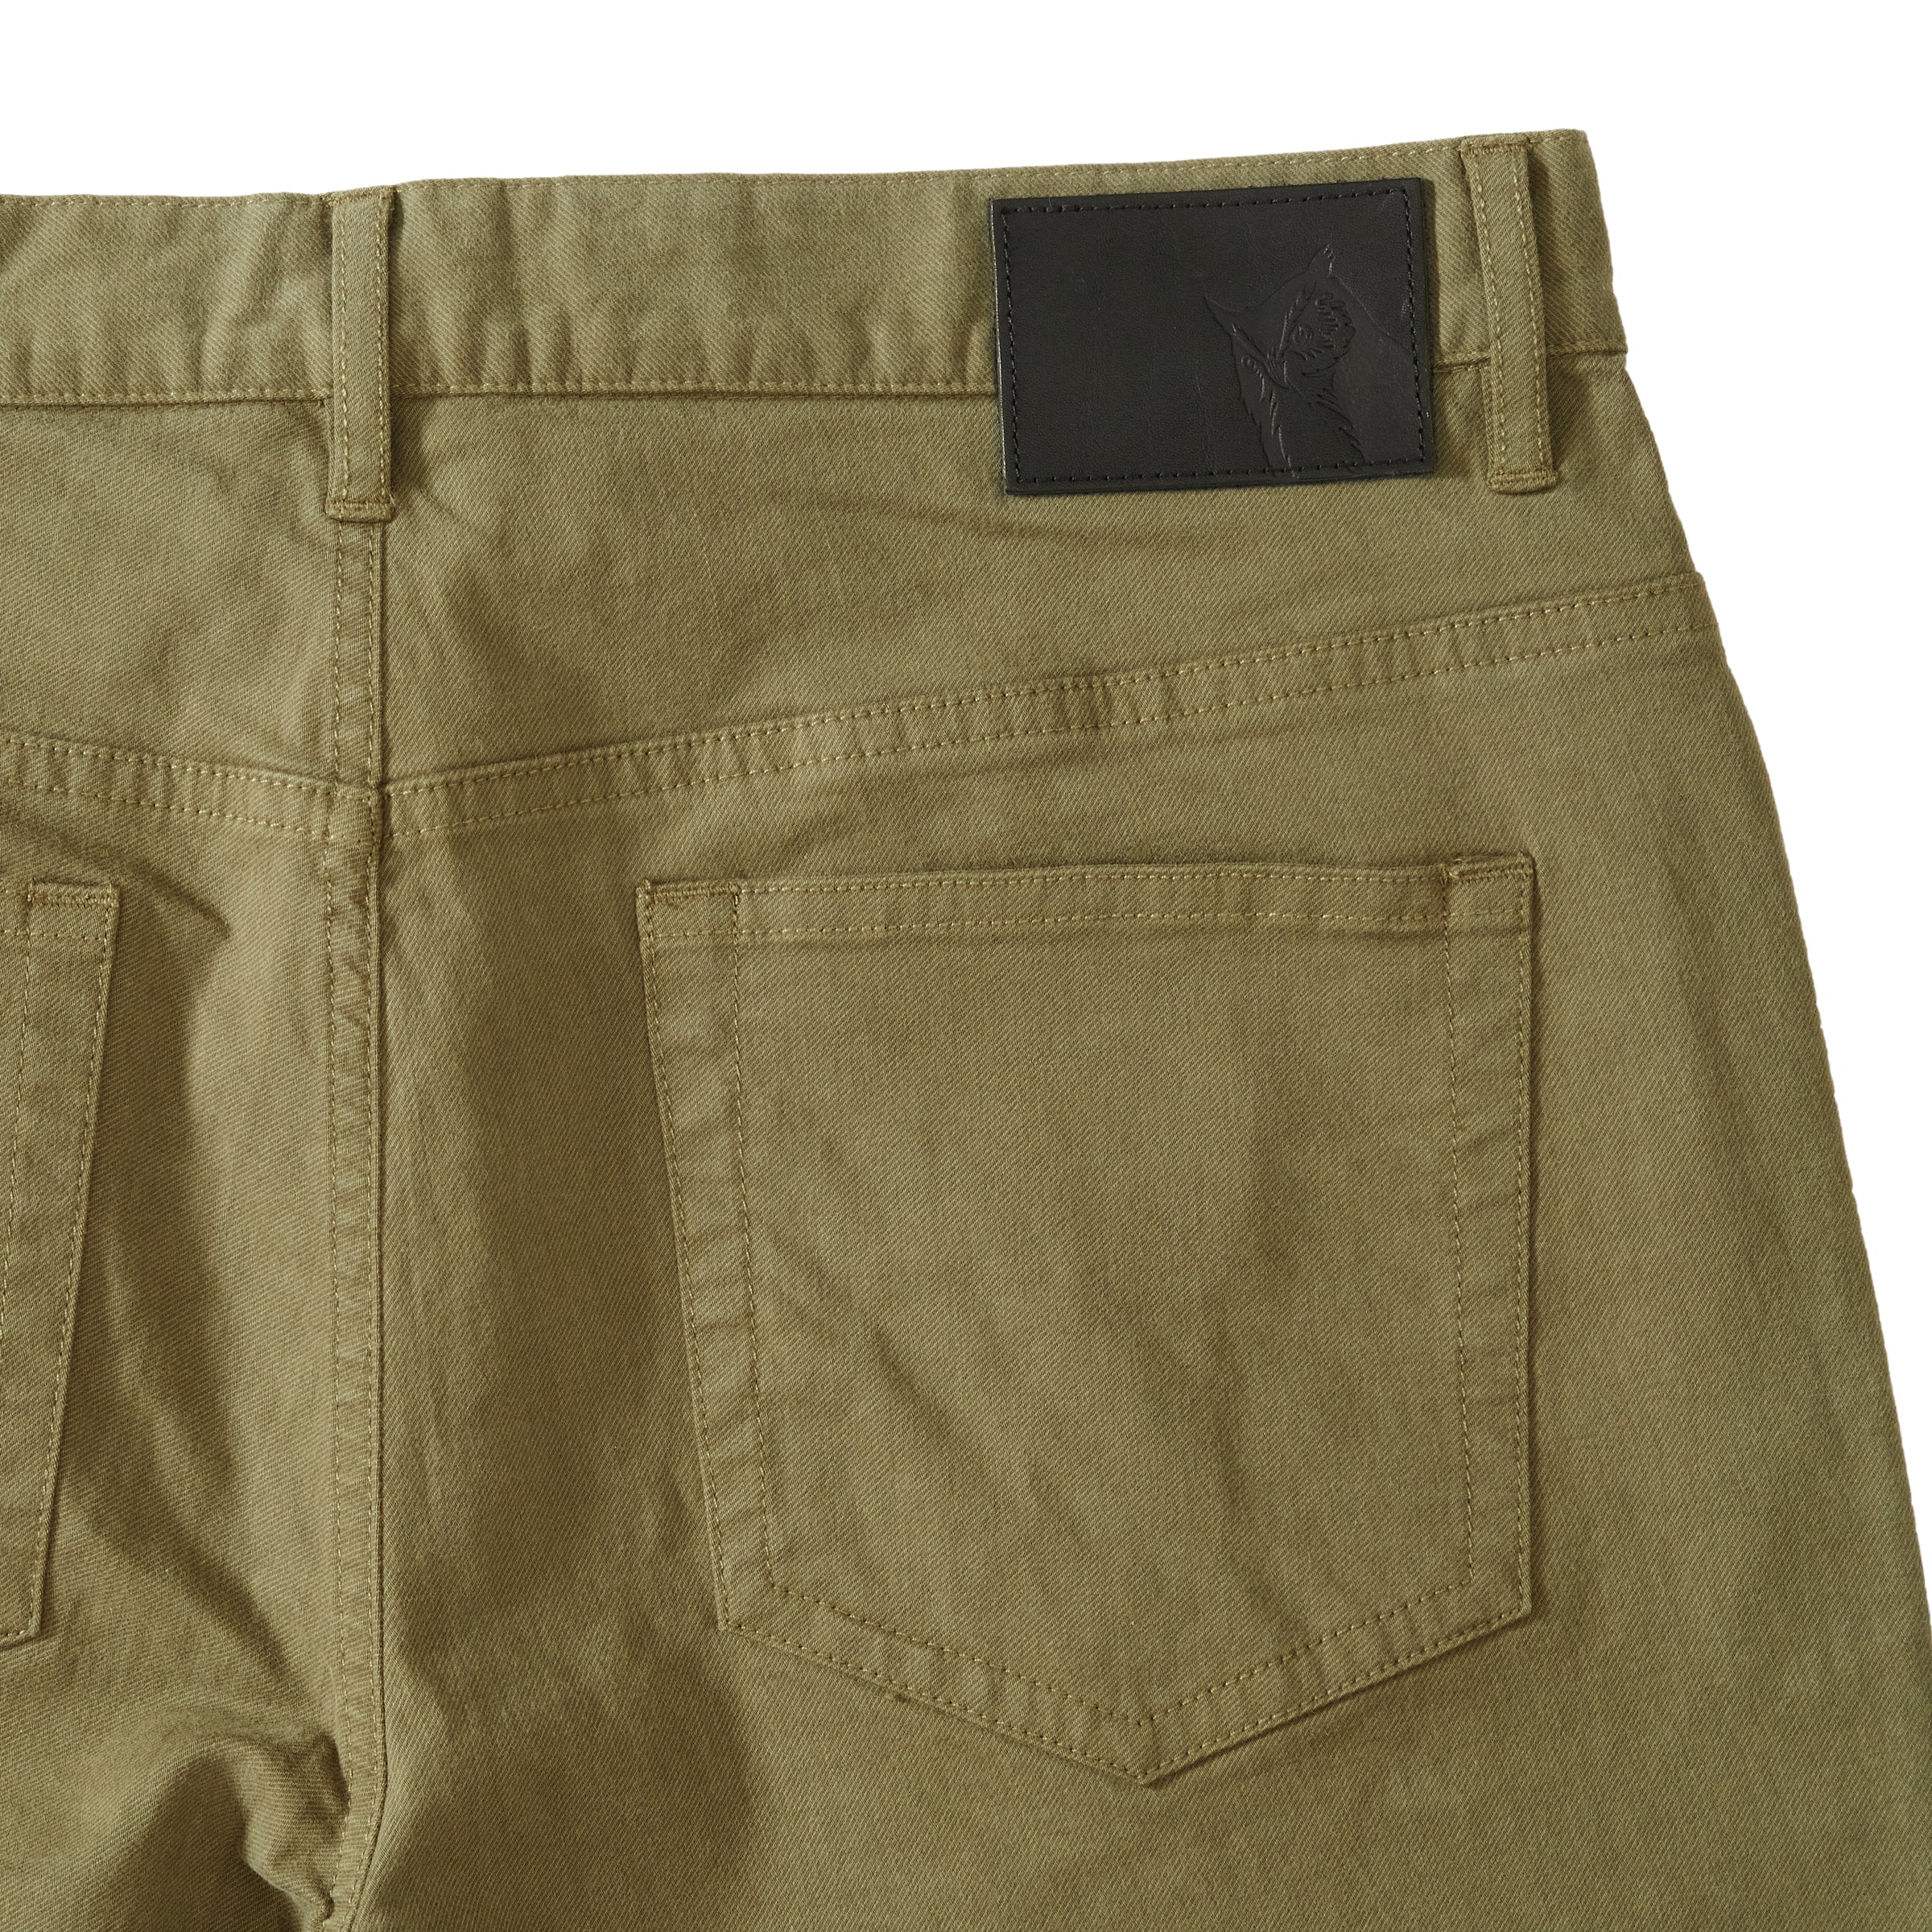 Carnaby Stretch Double Weave 5 Pocket Pant - Dusty Olive (Final Sale ...